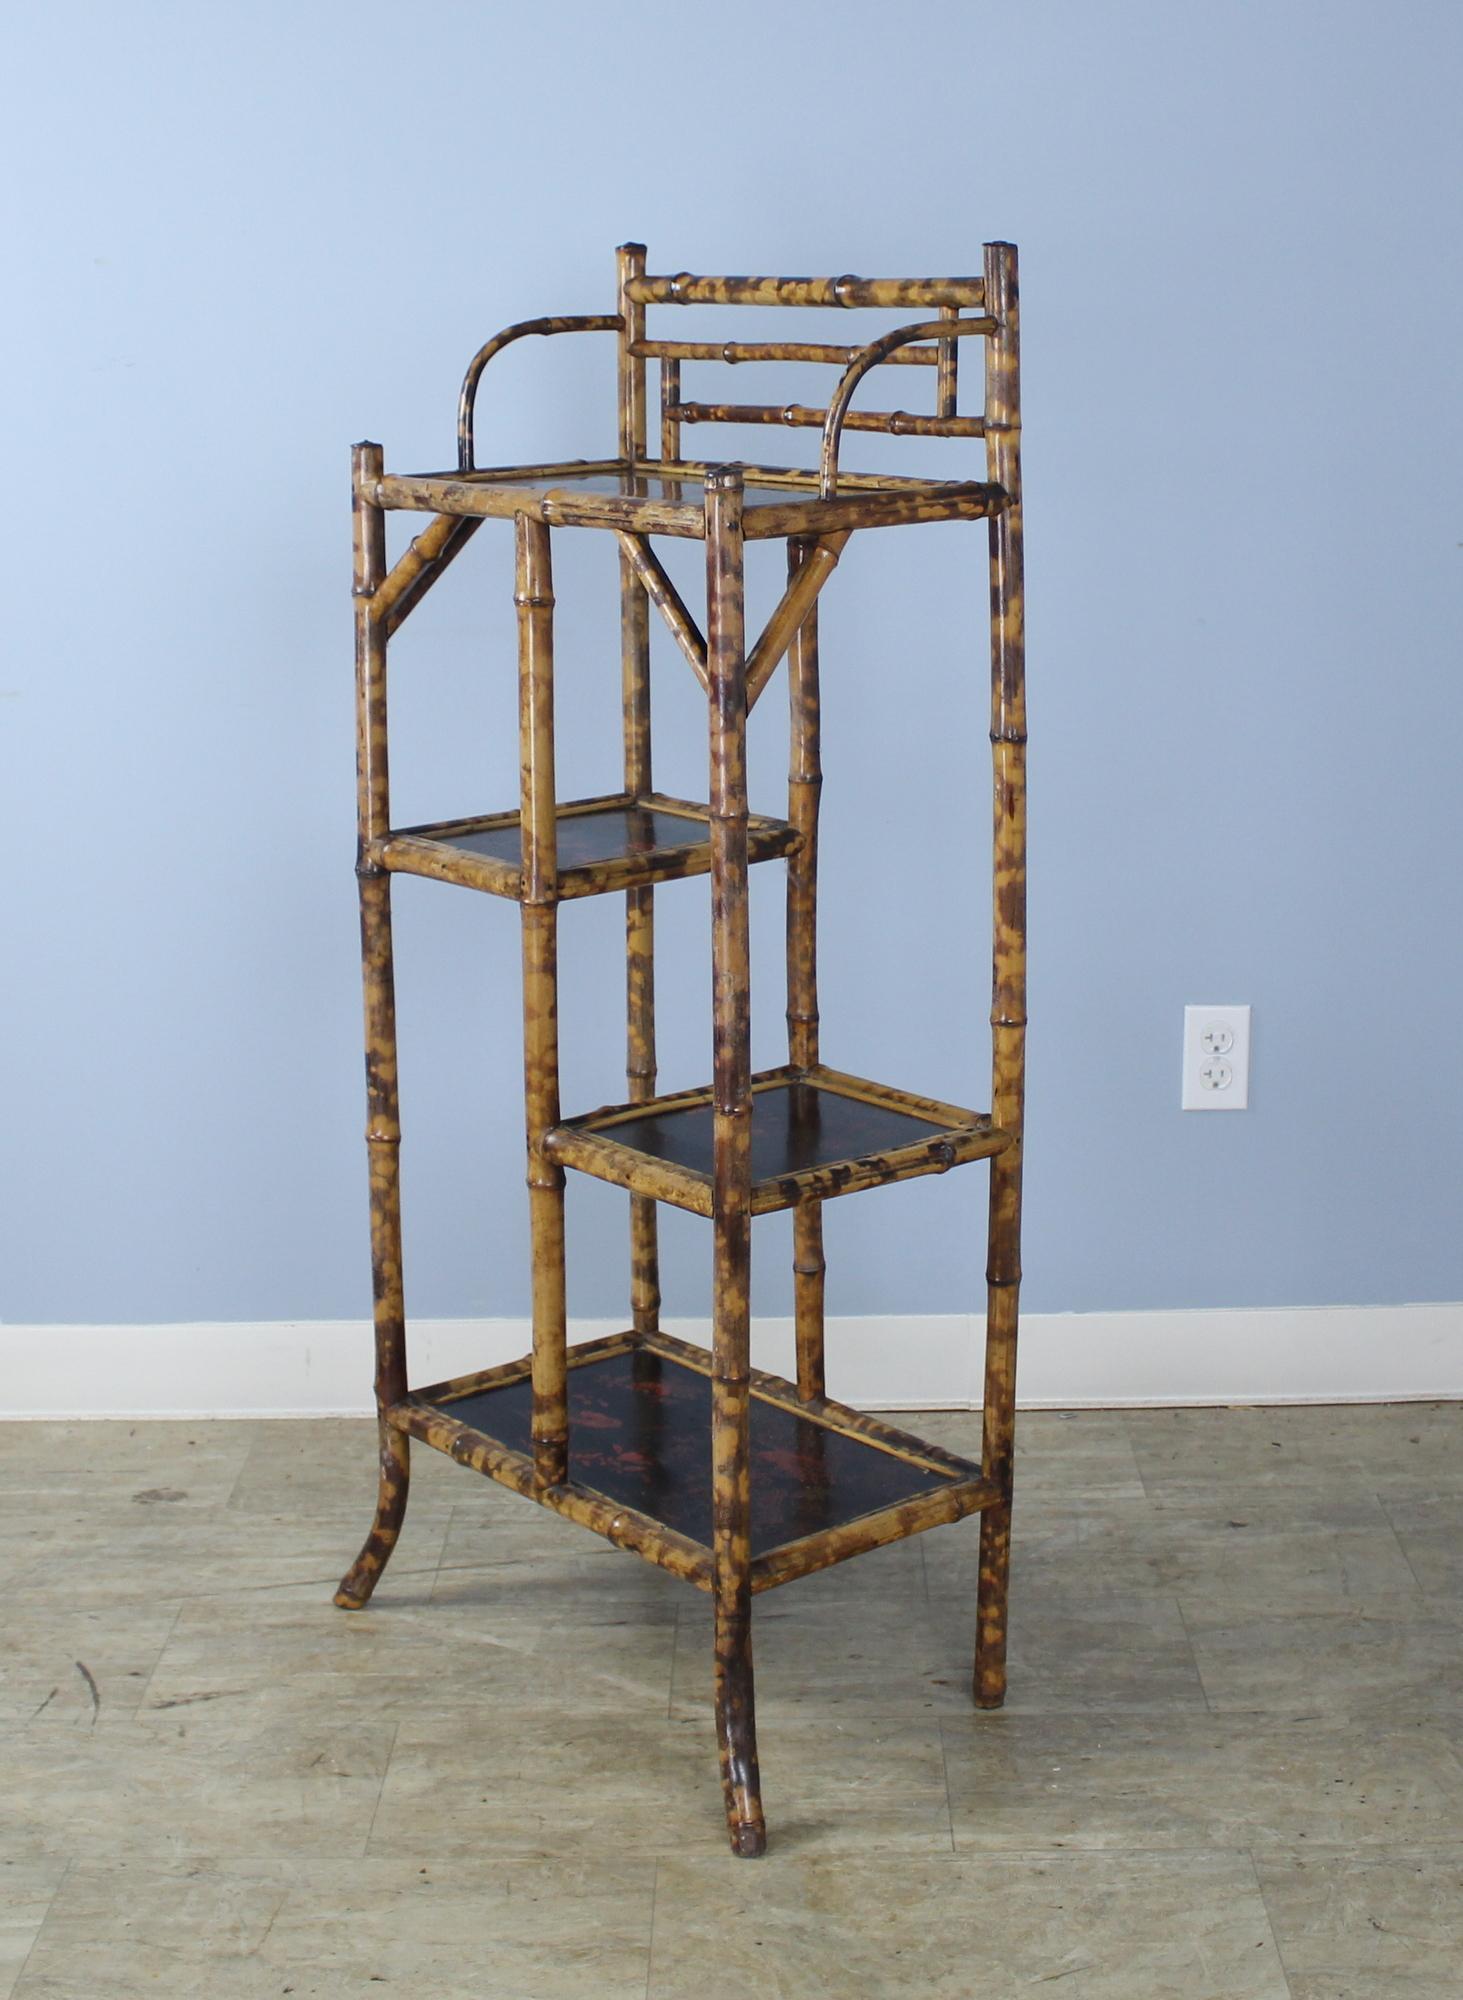 A highly decorative bamboo etagiere, bookcase or rack with terrific chinoiserie floral and bird lacquered shelves. The bamboo is vibrantly painted and in good antique condition. Piece is very stable and versatile.